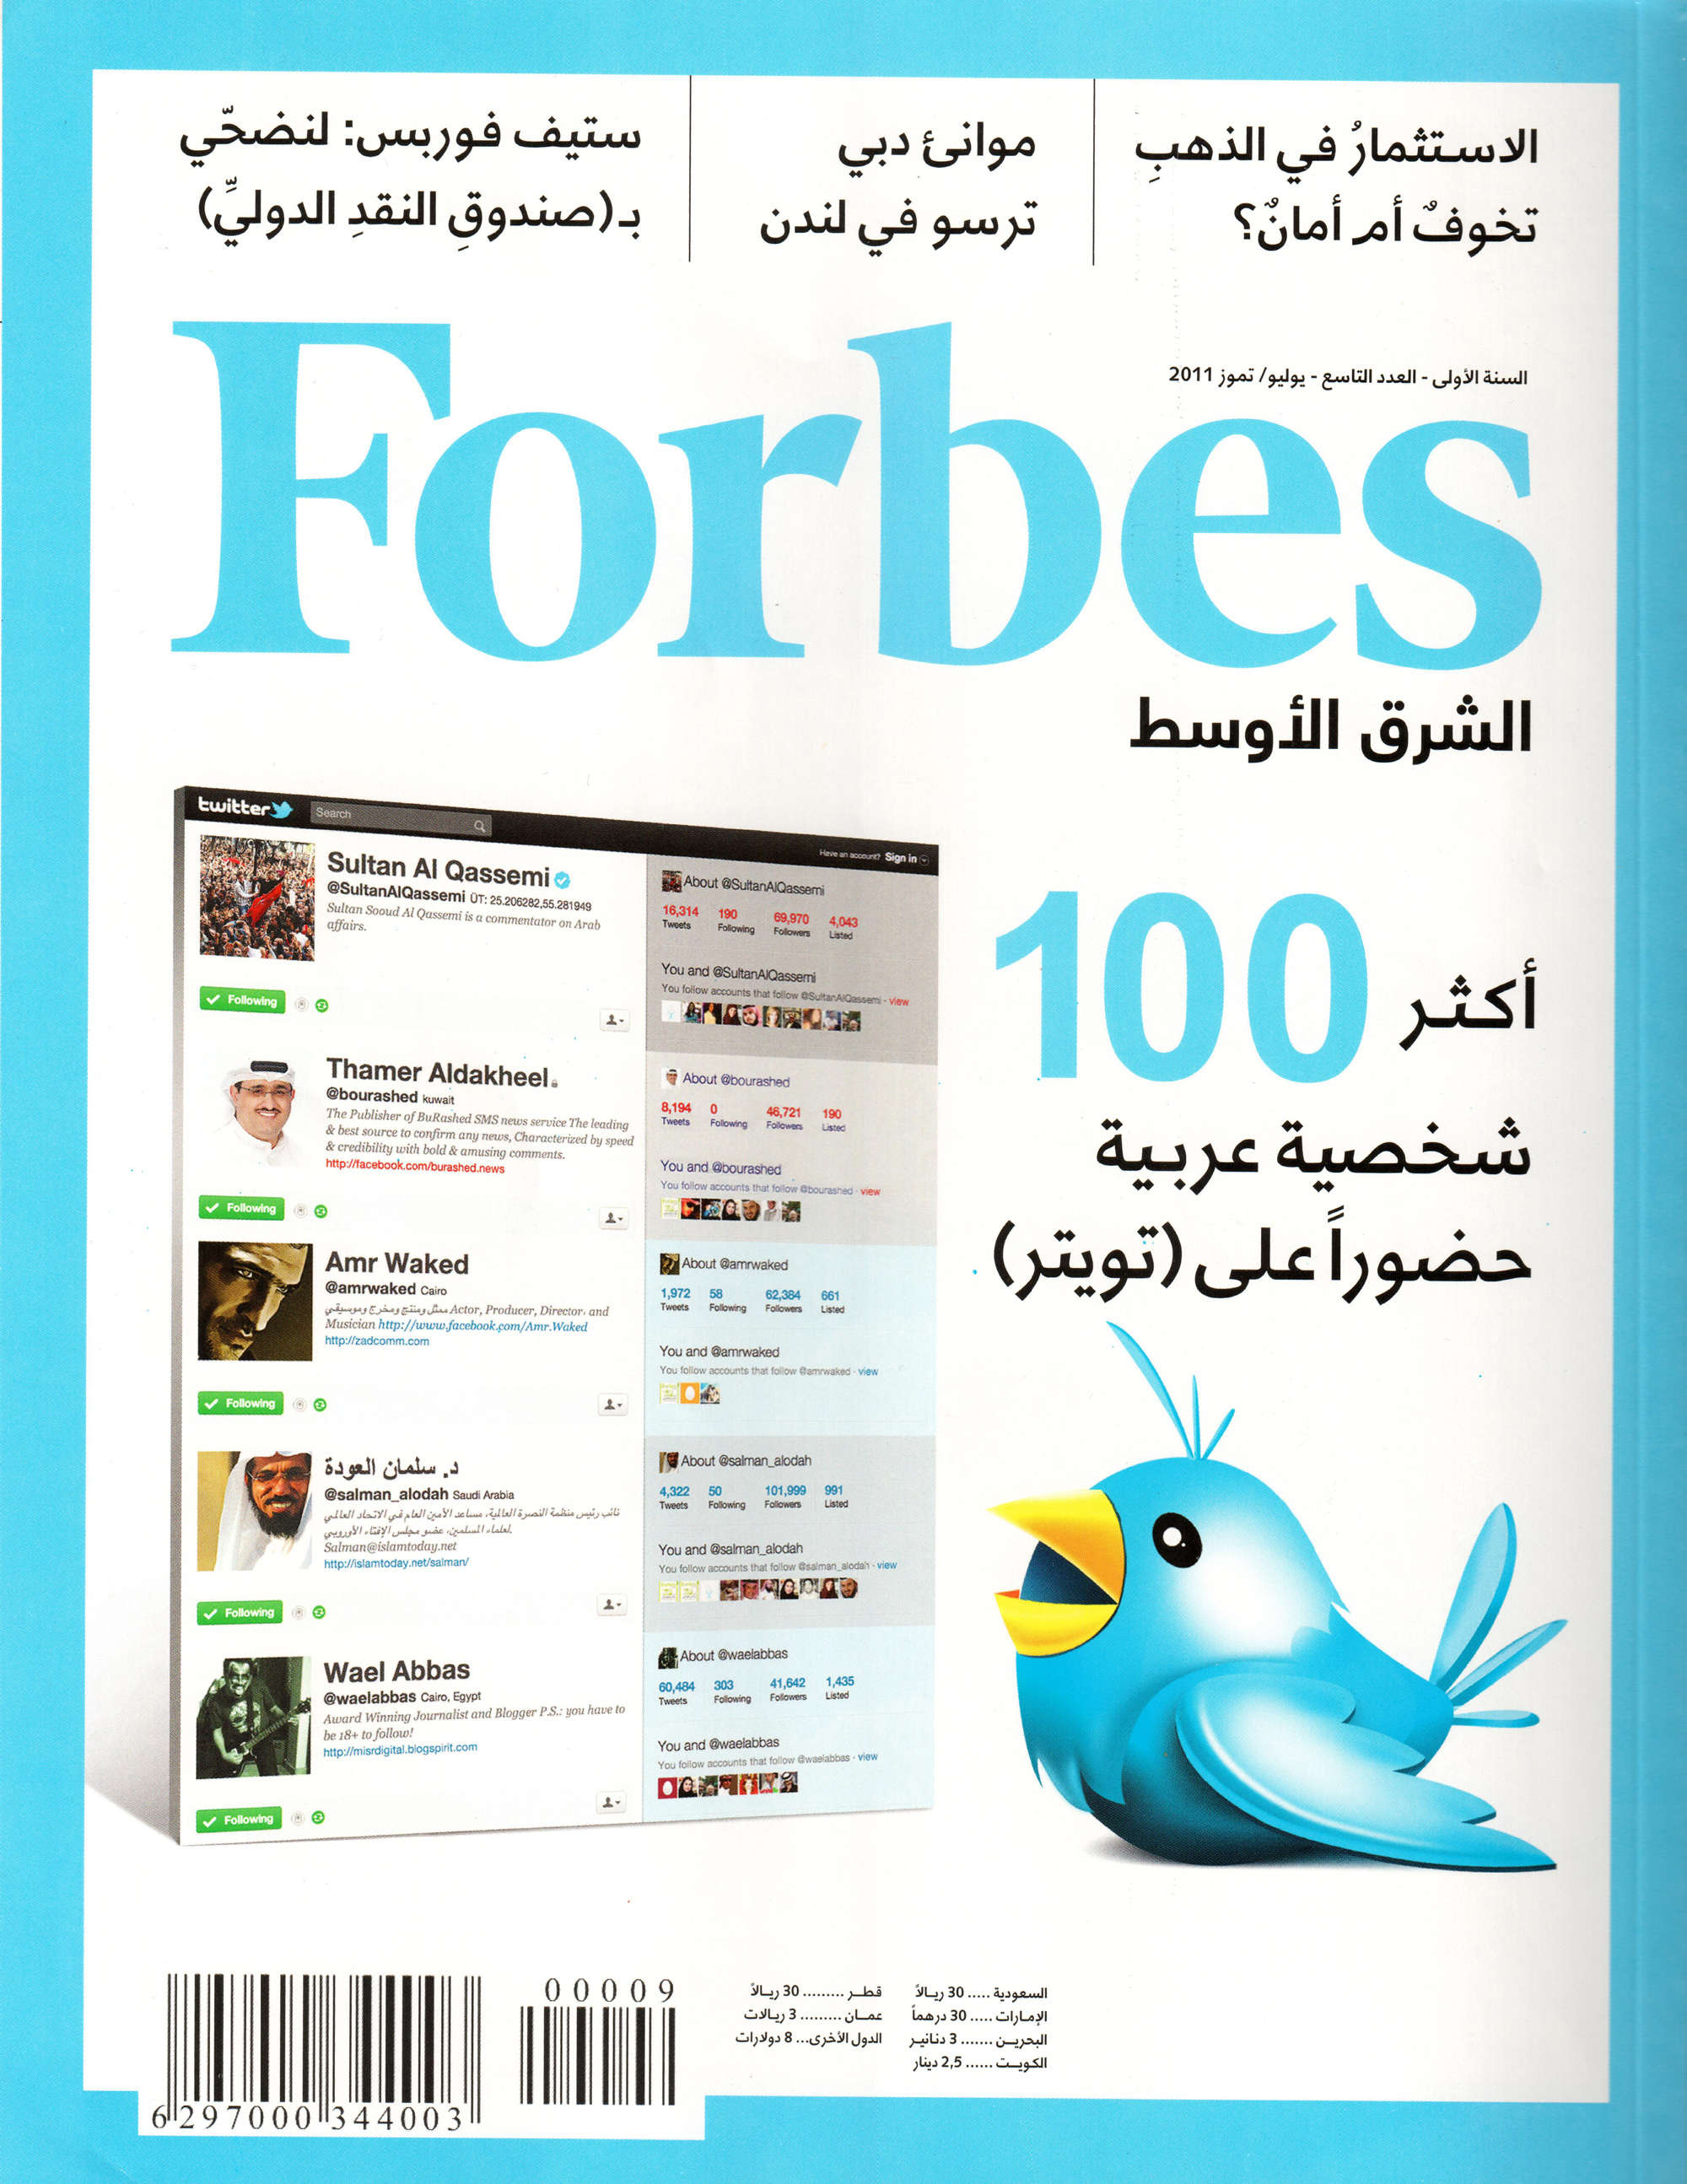 Forbes Top 100 on Twitter